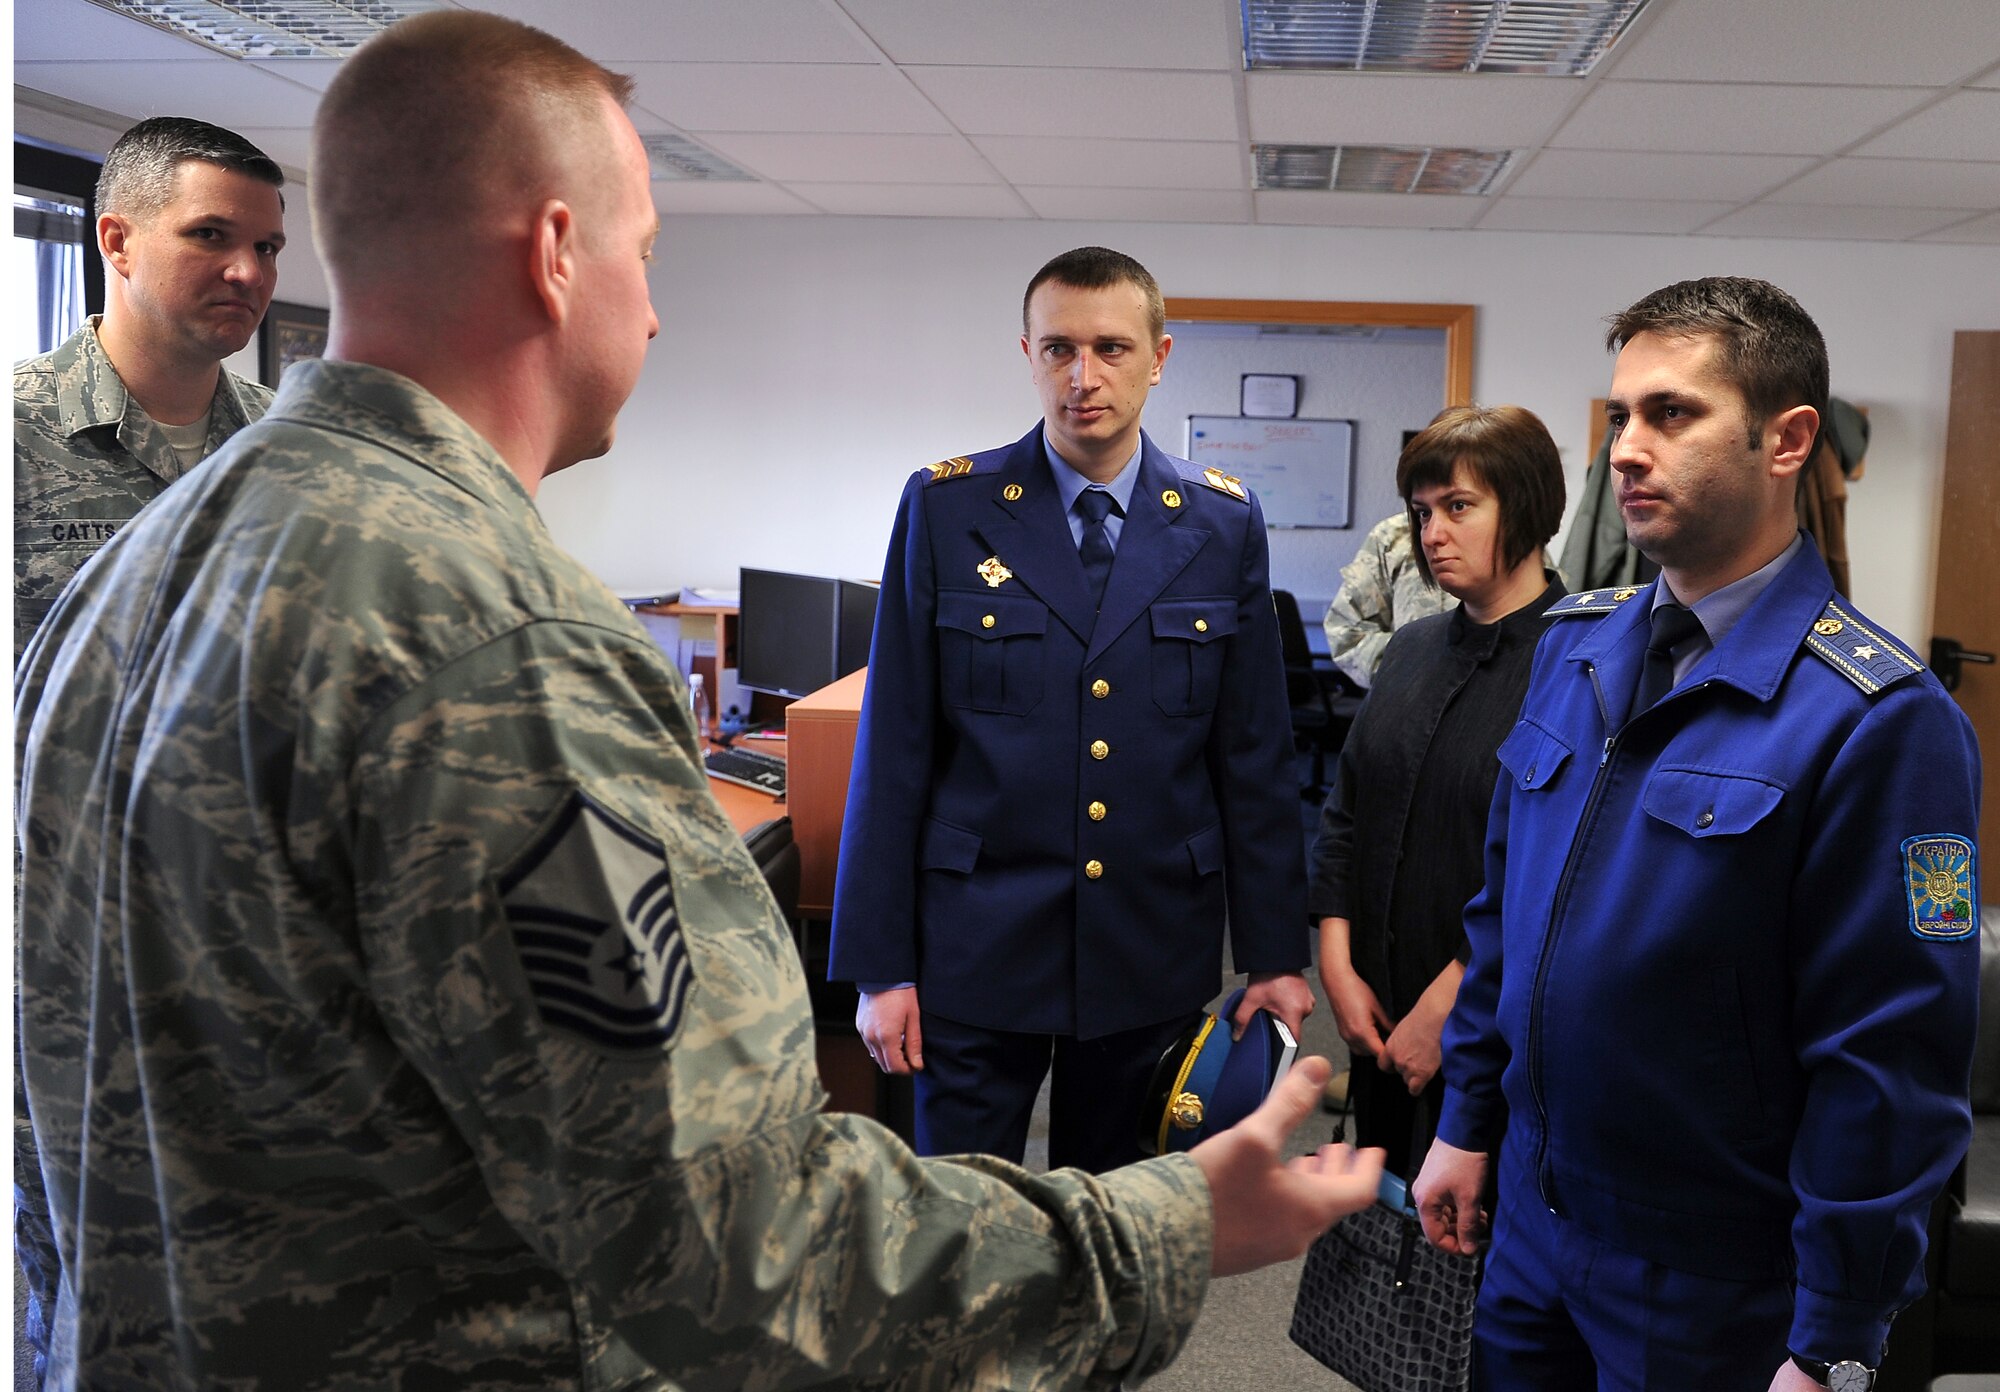 Master Sgt. Etienne P. Tousignant, 86th Force Support Squadron first term Airman course instructor, briefs visitors from the Ukrainian military on the importance of introducing new Airmen to the Air Force, as well as to the base, March 5, 2013, Ramstein Air Base, Germany. Members of the Ukrainian military visited the NCO academy to continue their professional military education operations and increase their knowledge in enlisted empowerment and leadership. (U.S. Air Force photo/Airman 1st Class Dymekre Allen)